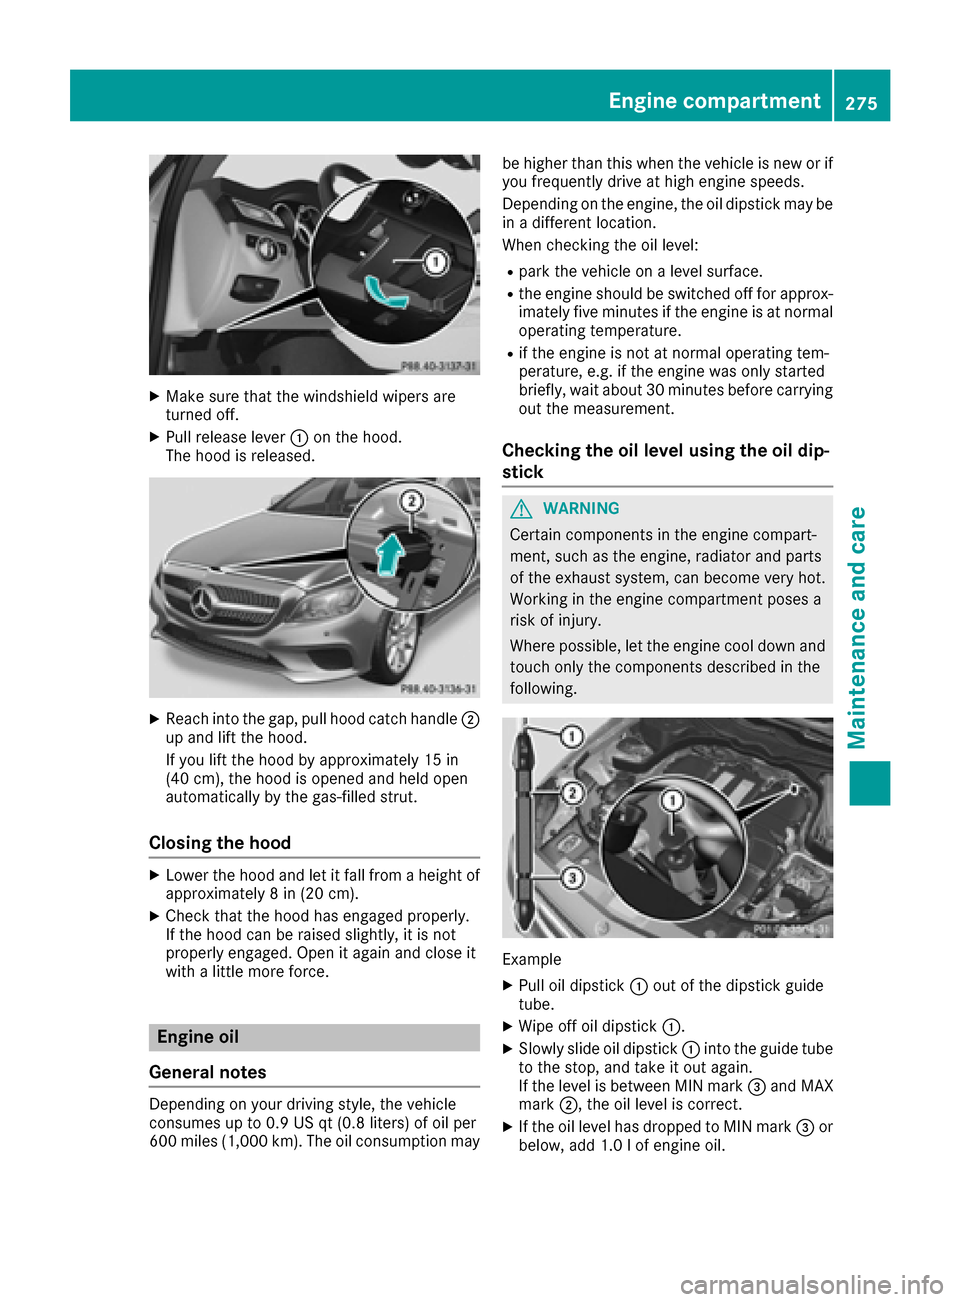 MERCEDES-BENZ CLS-Class 2016 W218 User Guide XMake sure that the windshield wipers are
turned off.
XPull release lever:on the hood.
The hood is released.
XReach into the gap, pull hood catch handle ;
up and lift the hood.
If you lift the hood by